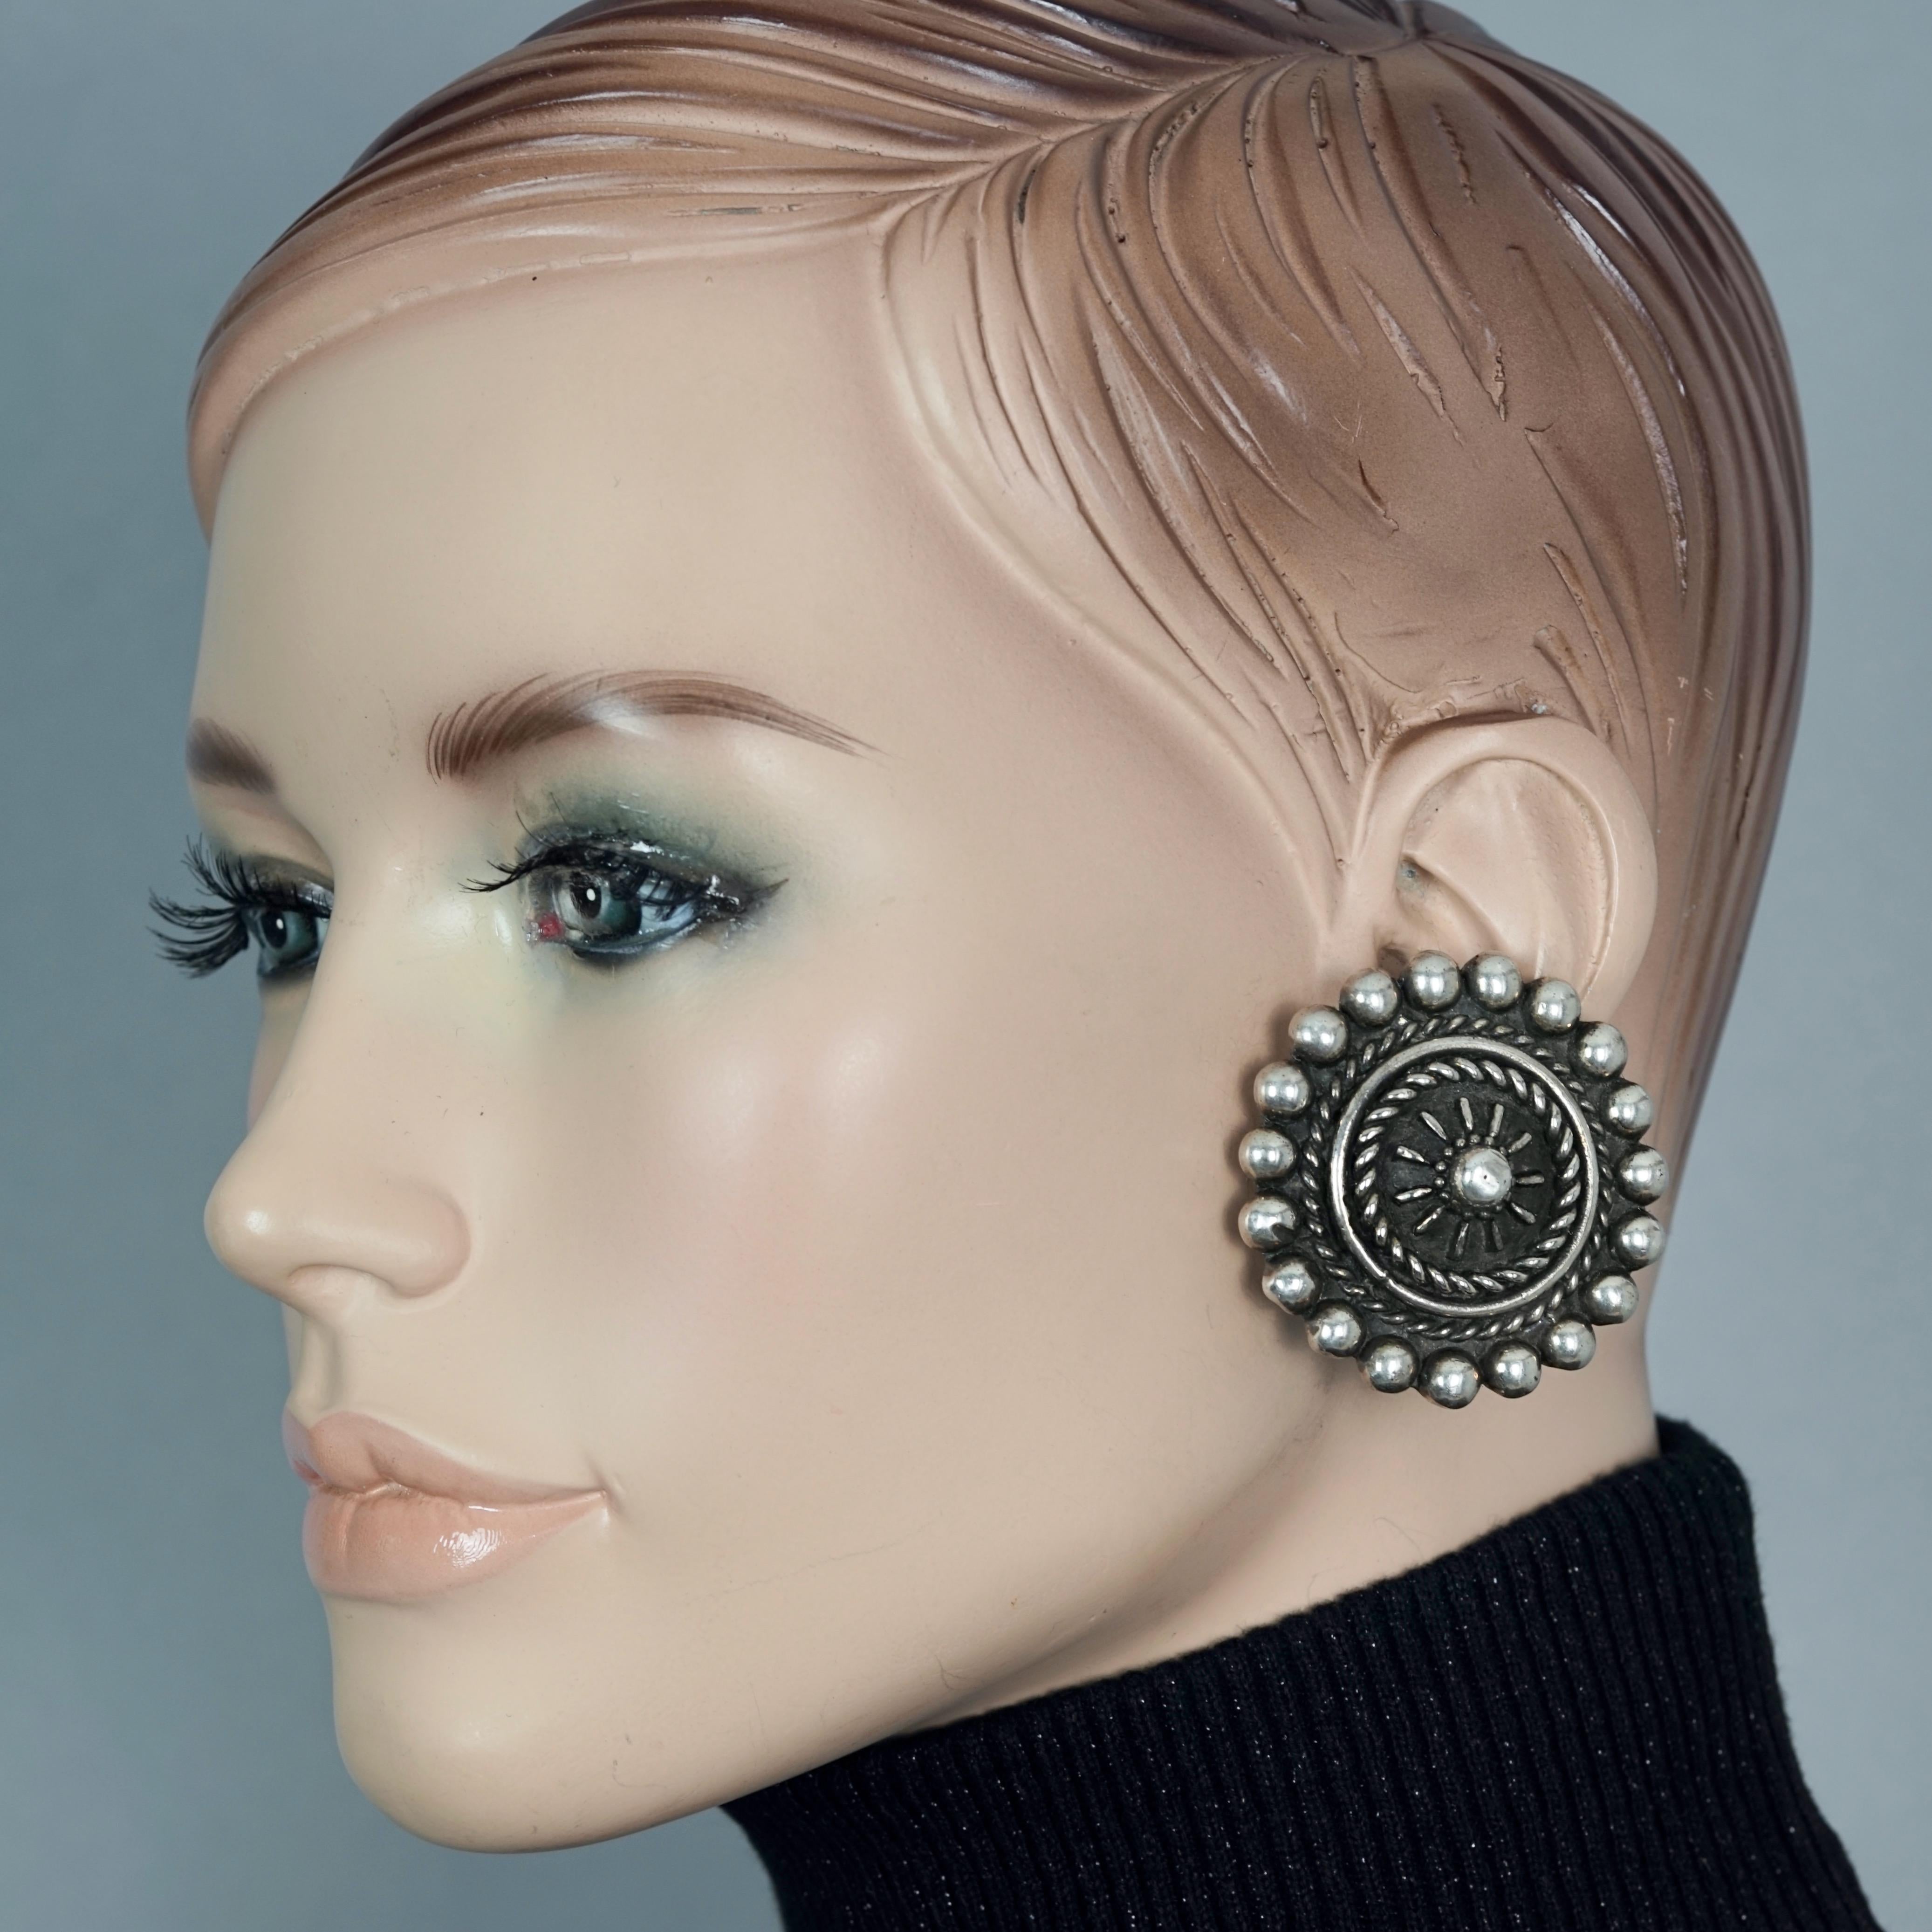 Vintage Massive SCOOTER PARIS Aztec Ethnic Disc Earrings

Measurements:
Height: 1.85 inches (4.7 cm) 
Width: 1.85 inches (4.7 cm) 
Weight per Earring: 19 grams

Features:
- 100% Authentic SCOOTER PARIS.
- Massive Aztec ethnic disc earrings.
- Clip